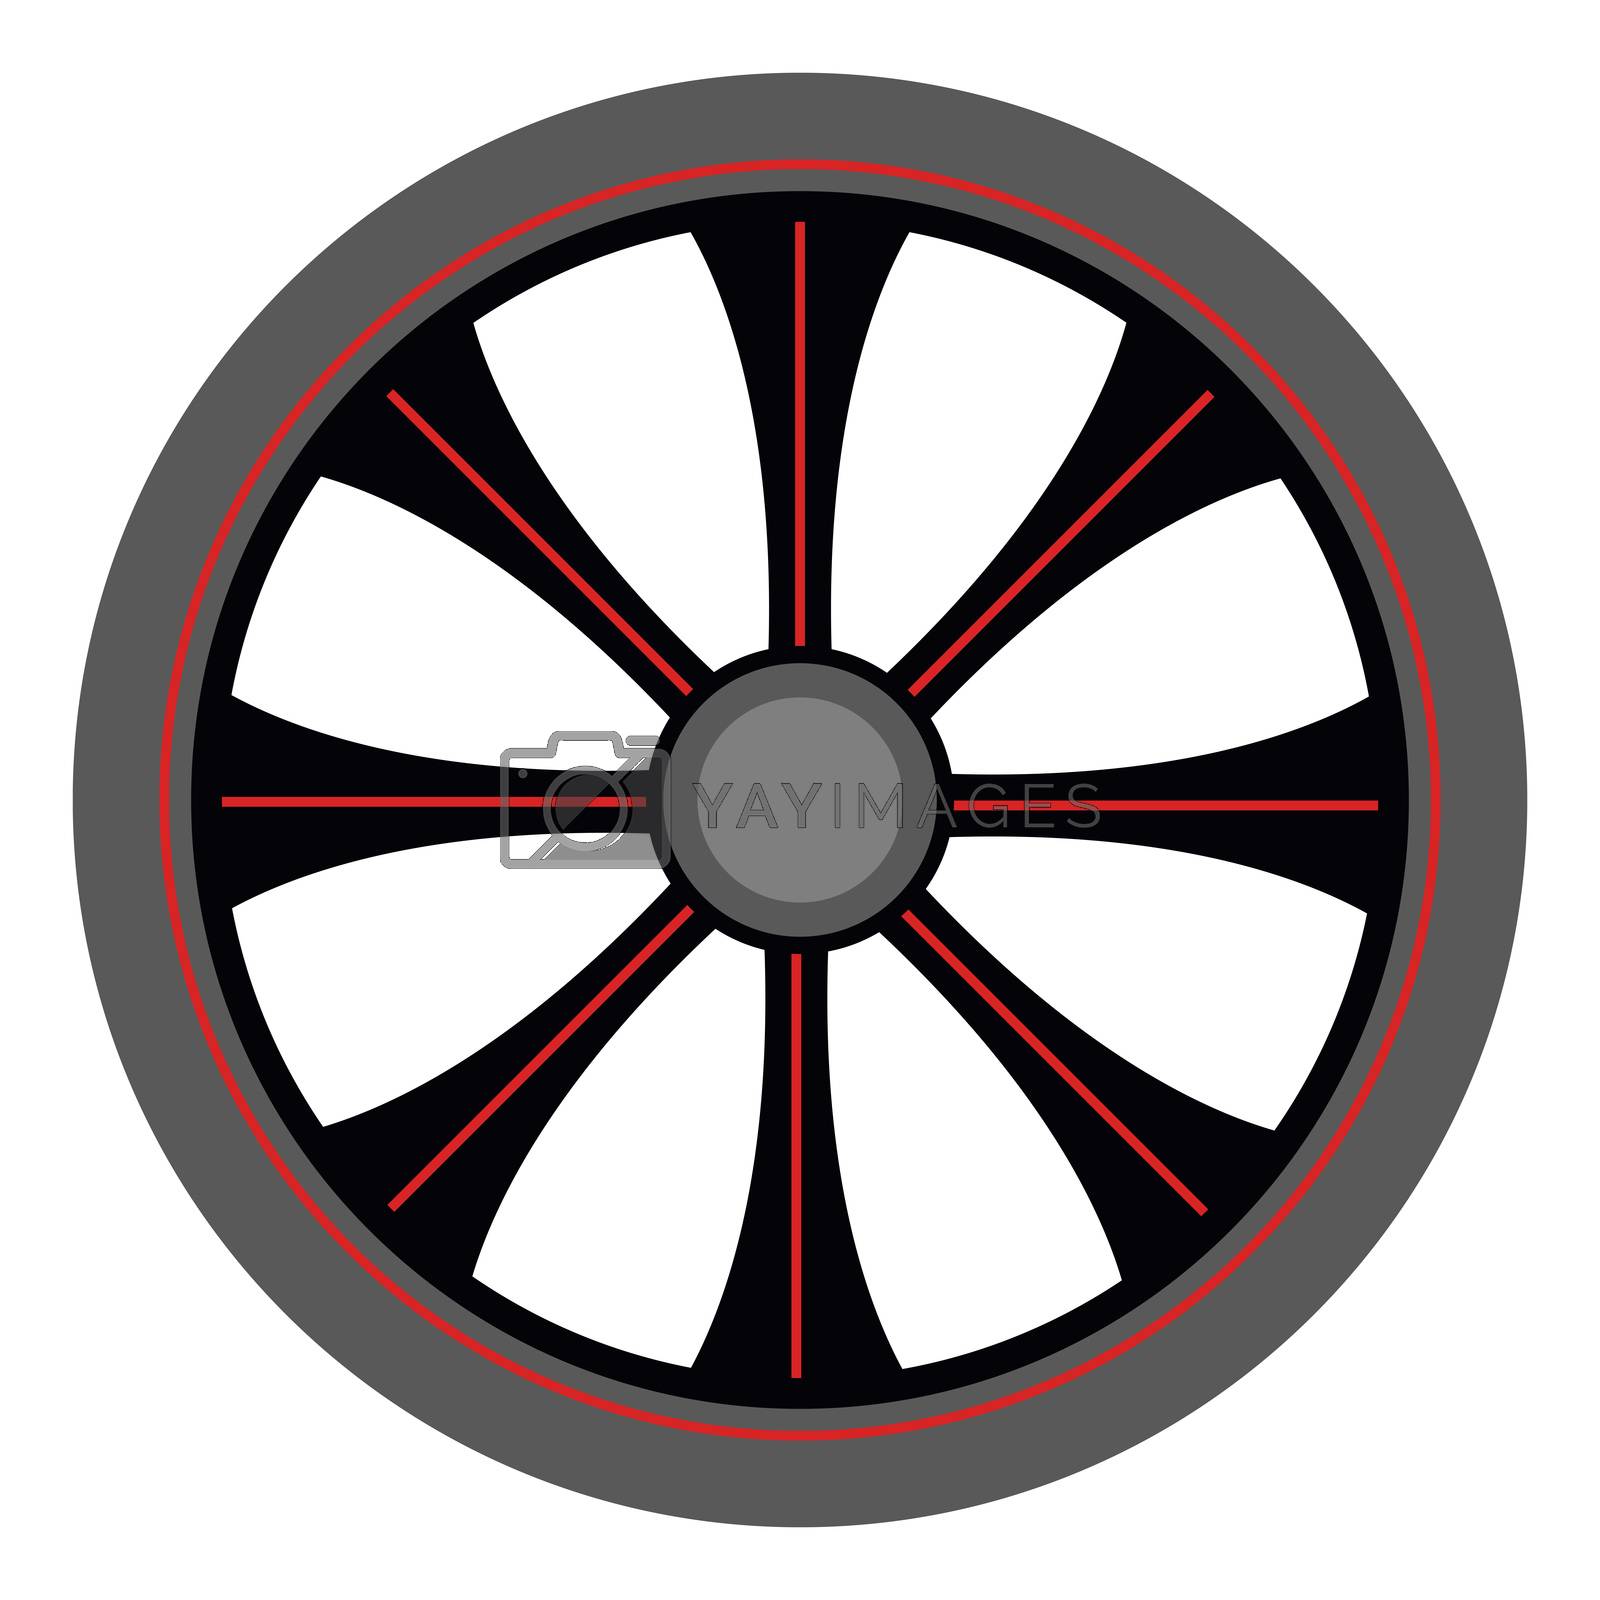 Royalty free image of Alloy wheel, illustration, vector on white background by Morphart